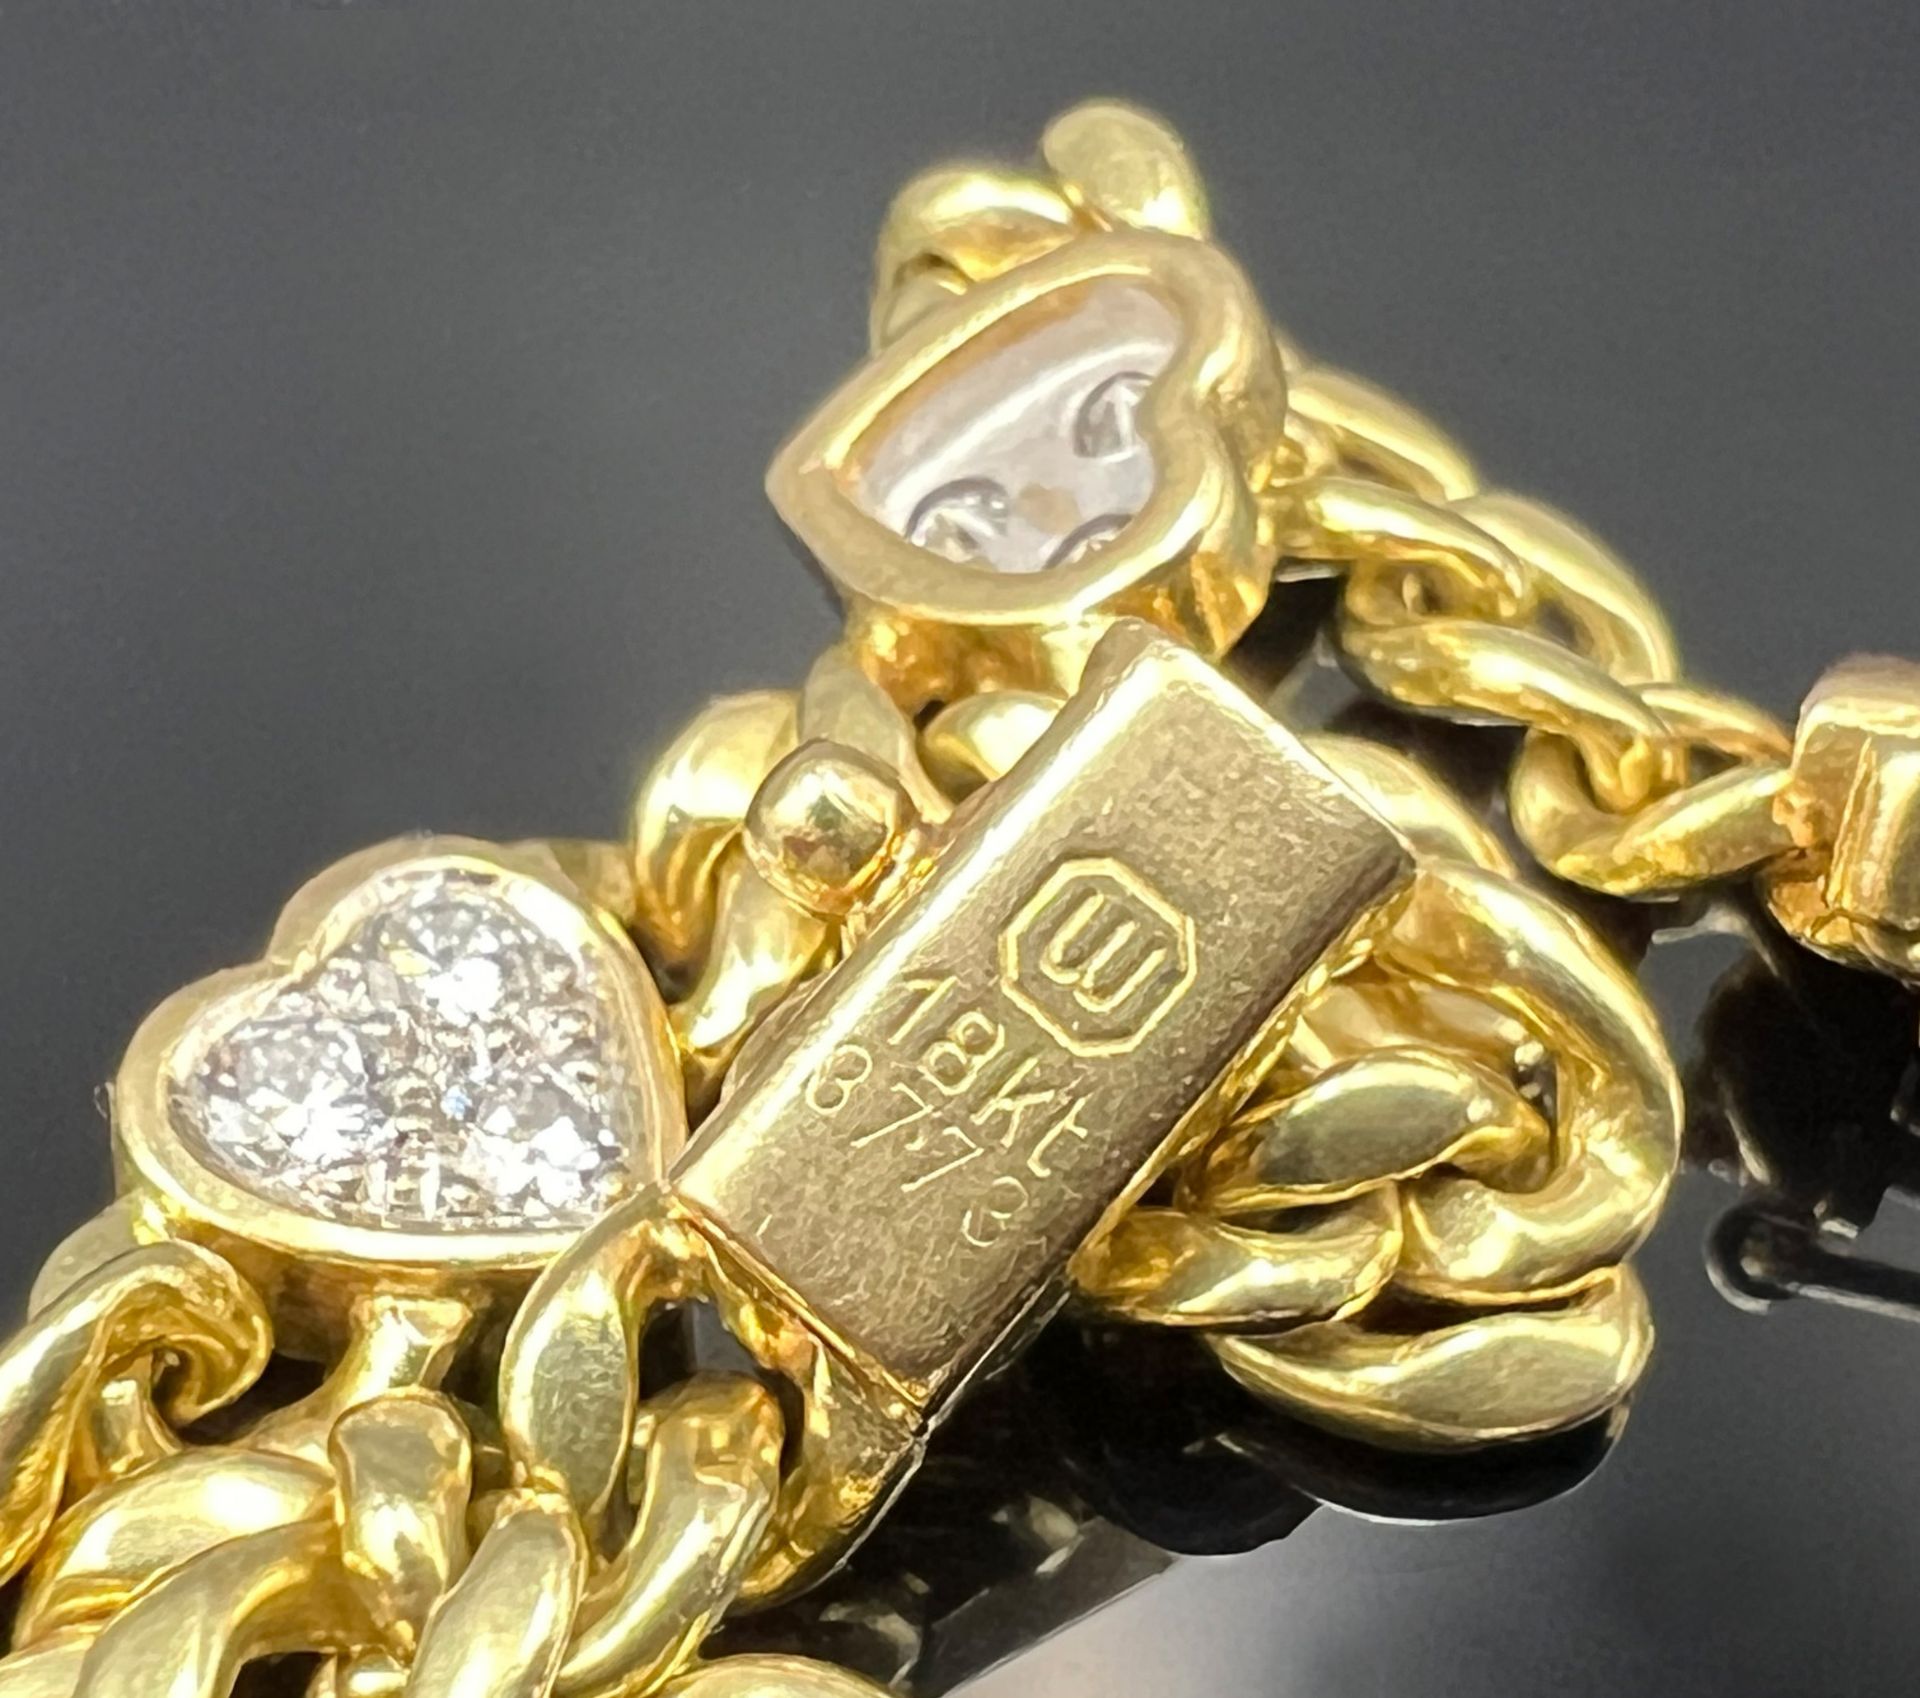 WEMPE 750 yellow gold bracelet with diamonds. - Image 4 of 8